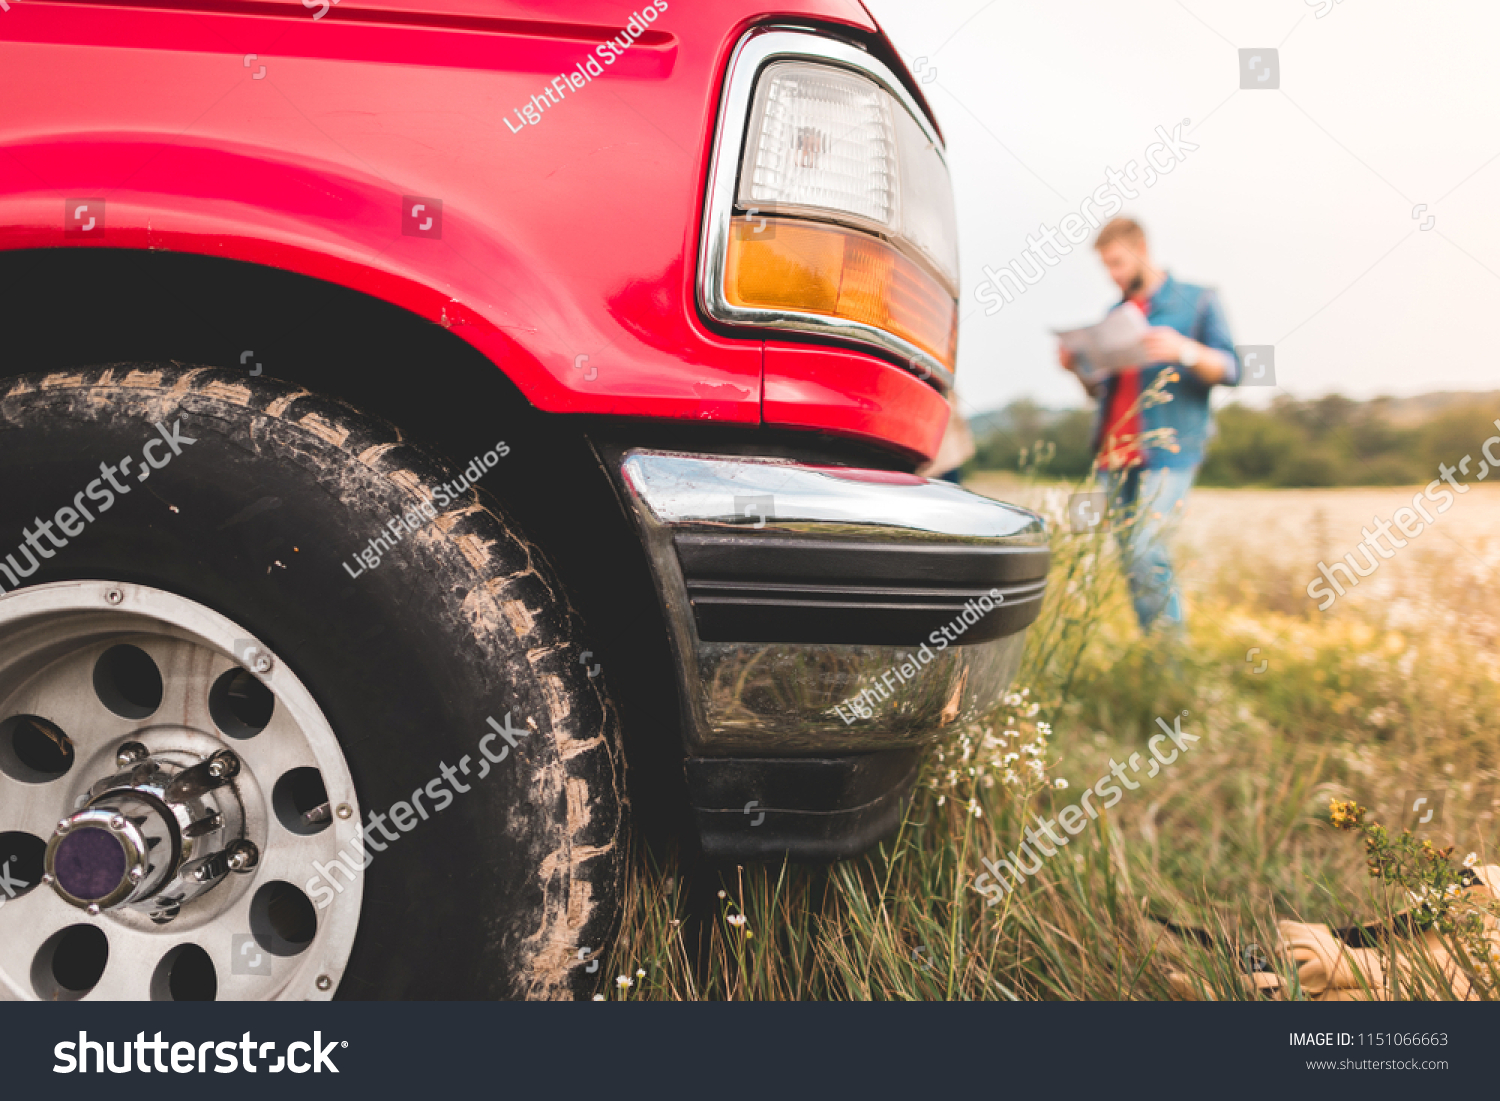 close-up shot of red truck standing in field with blurred man navigating with map on background #1151066663